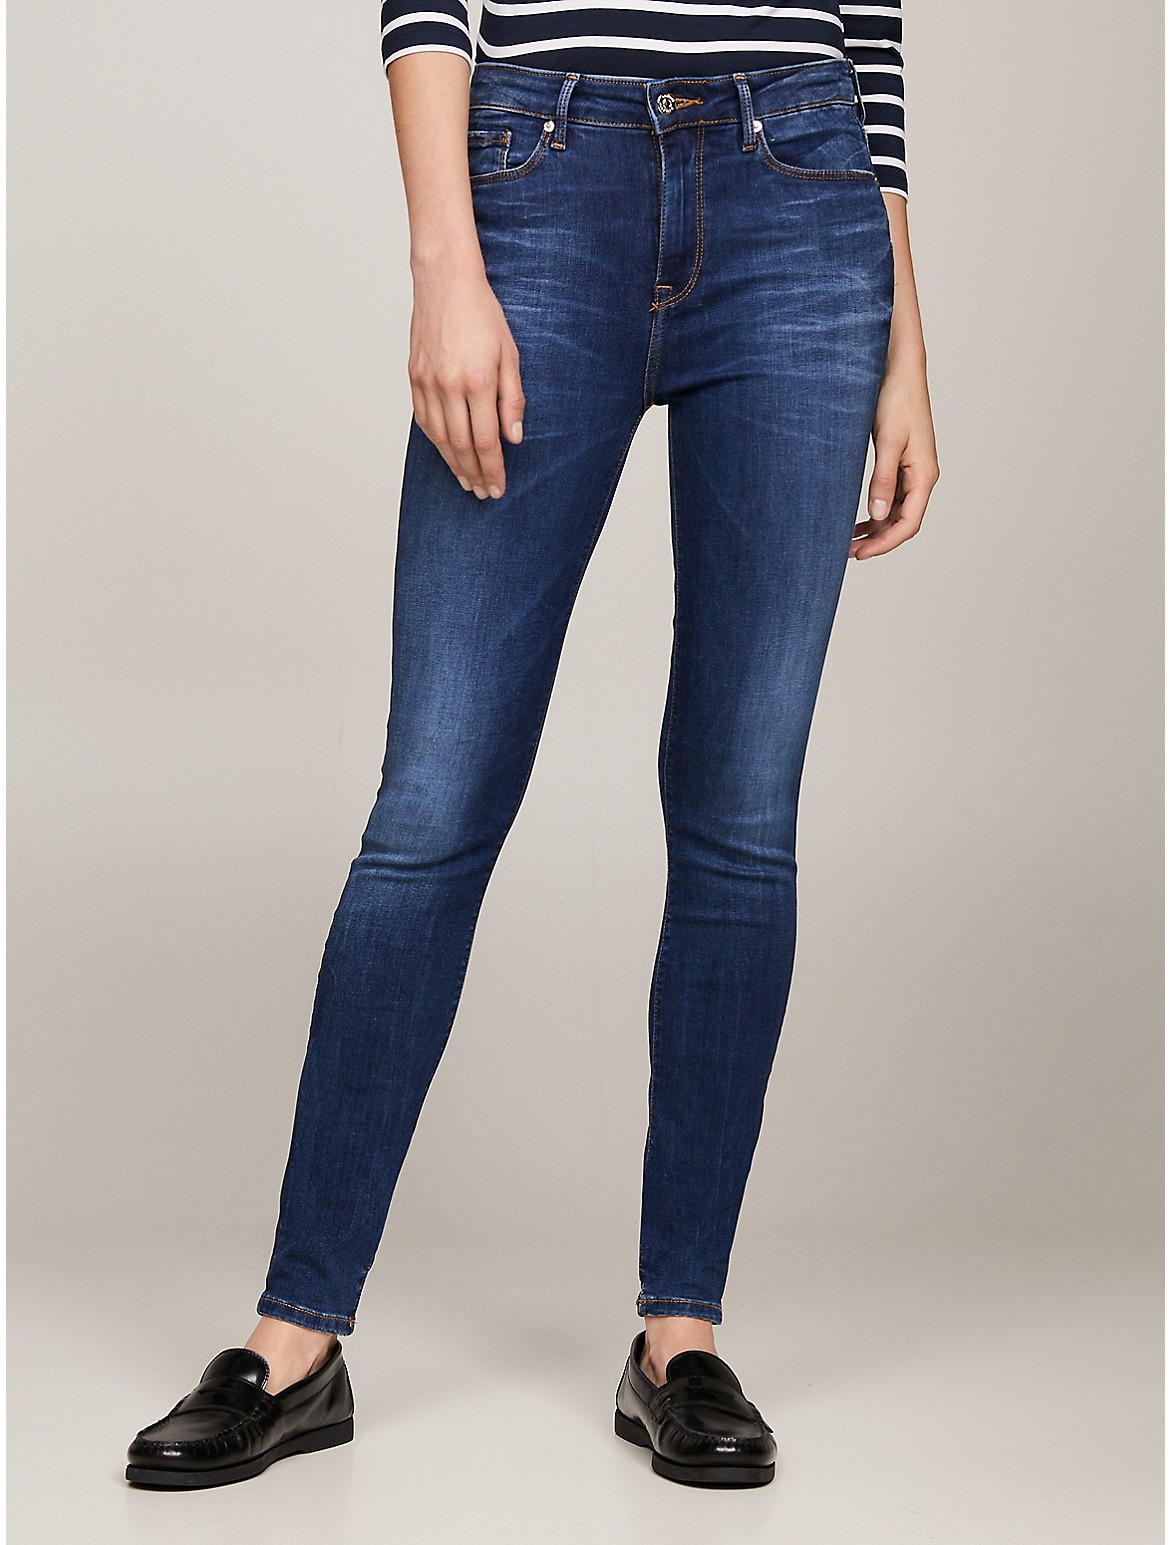 TOMMY HILFIGER Jeans ModeSens Women for 